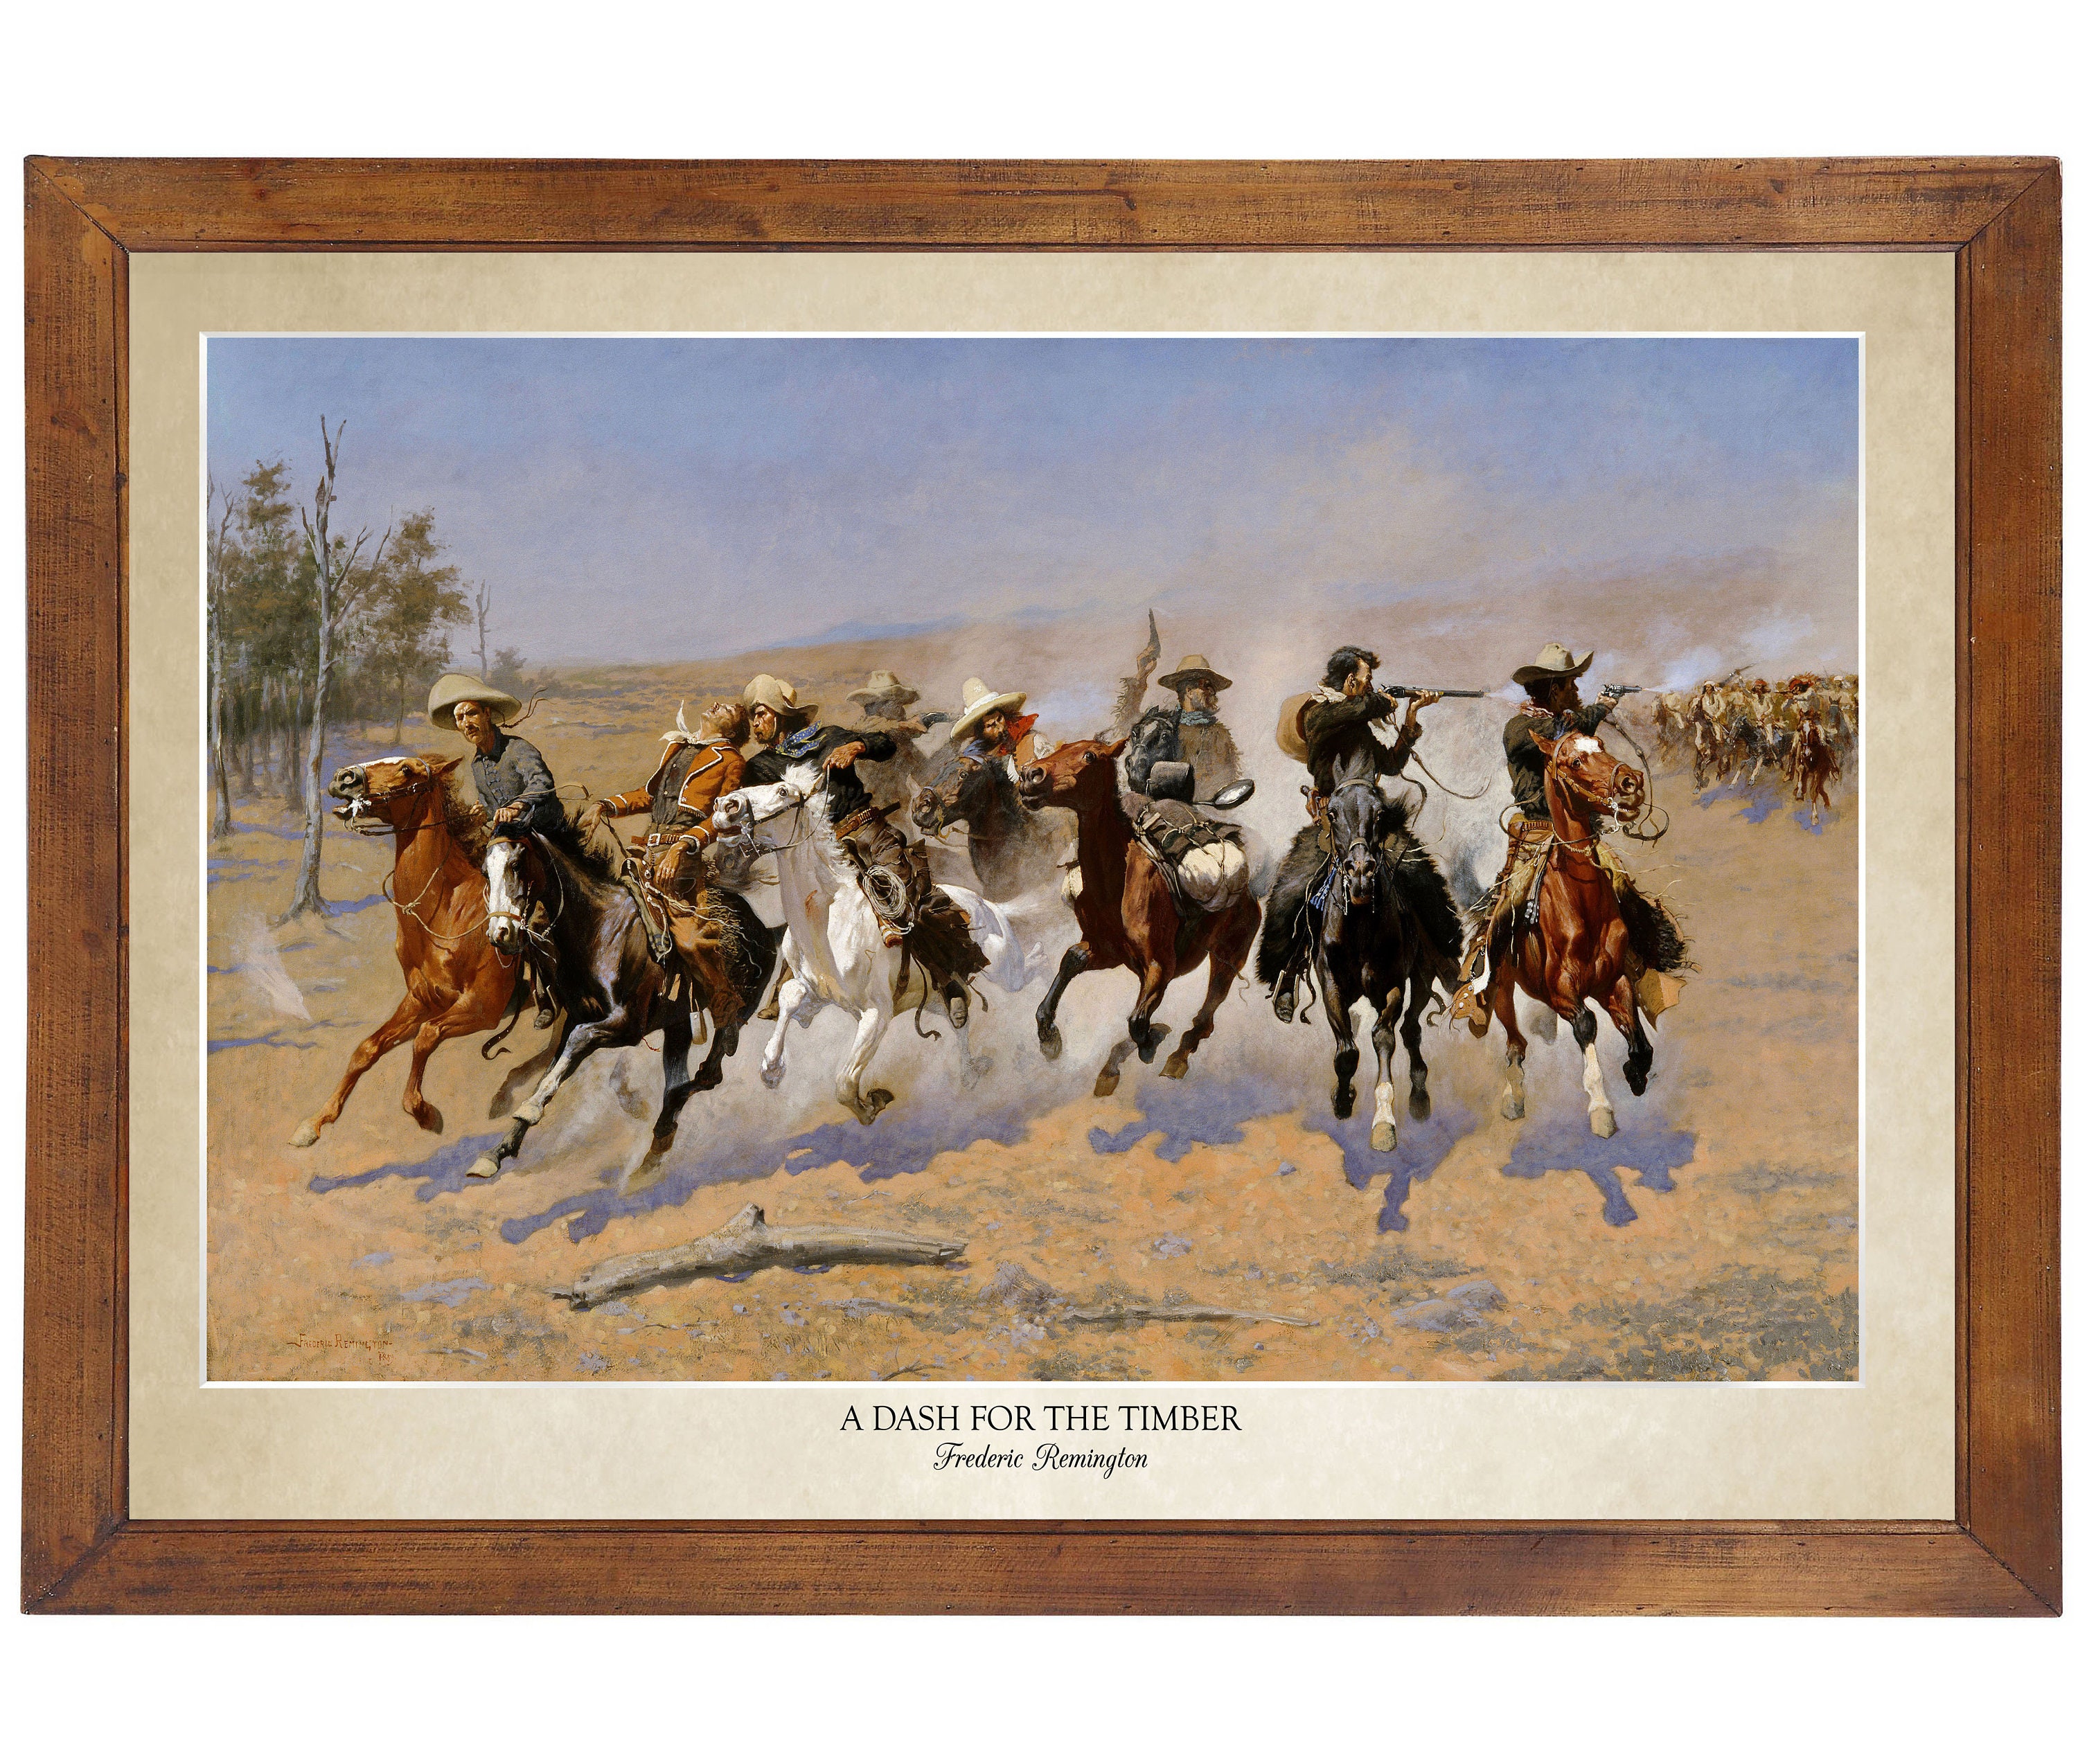 A Dash For The Timber, Frederic Remington 1889; 24x36 inch print (excludes frame)